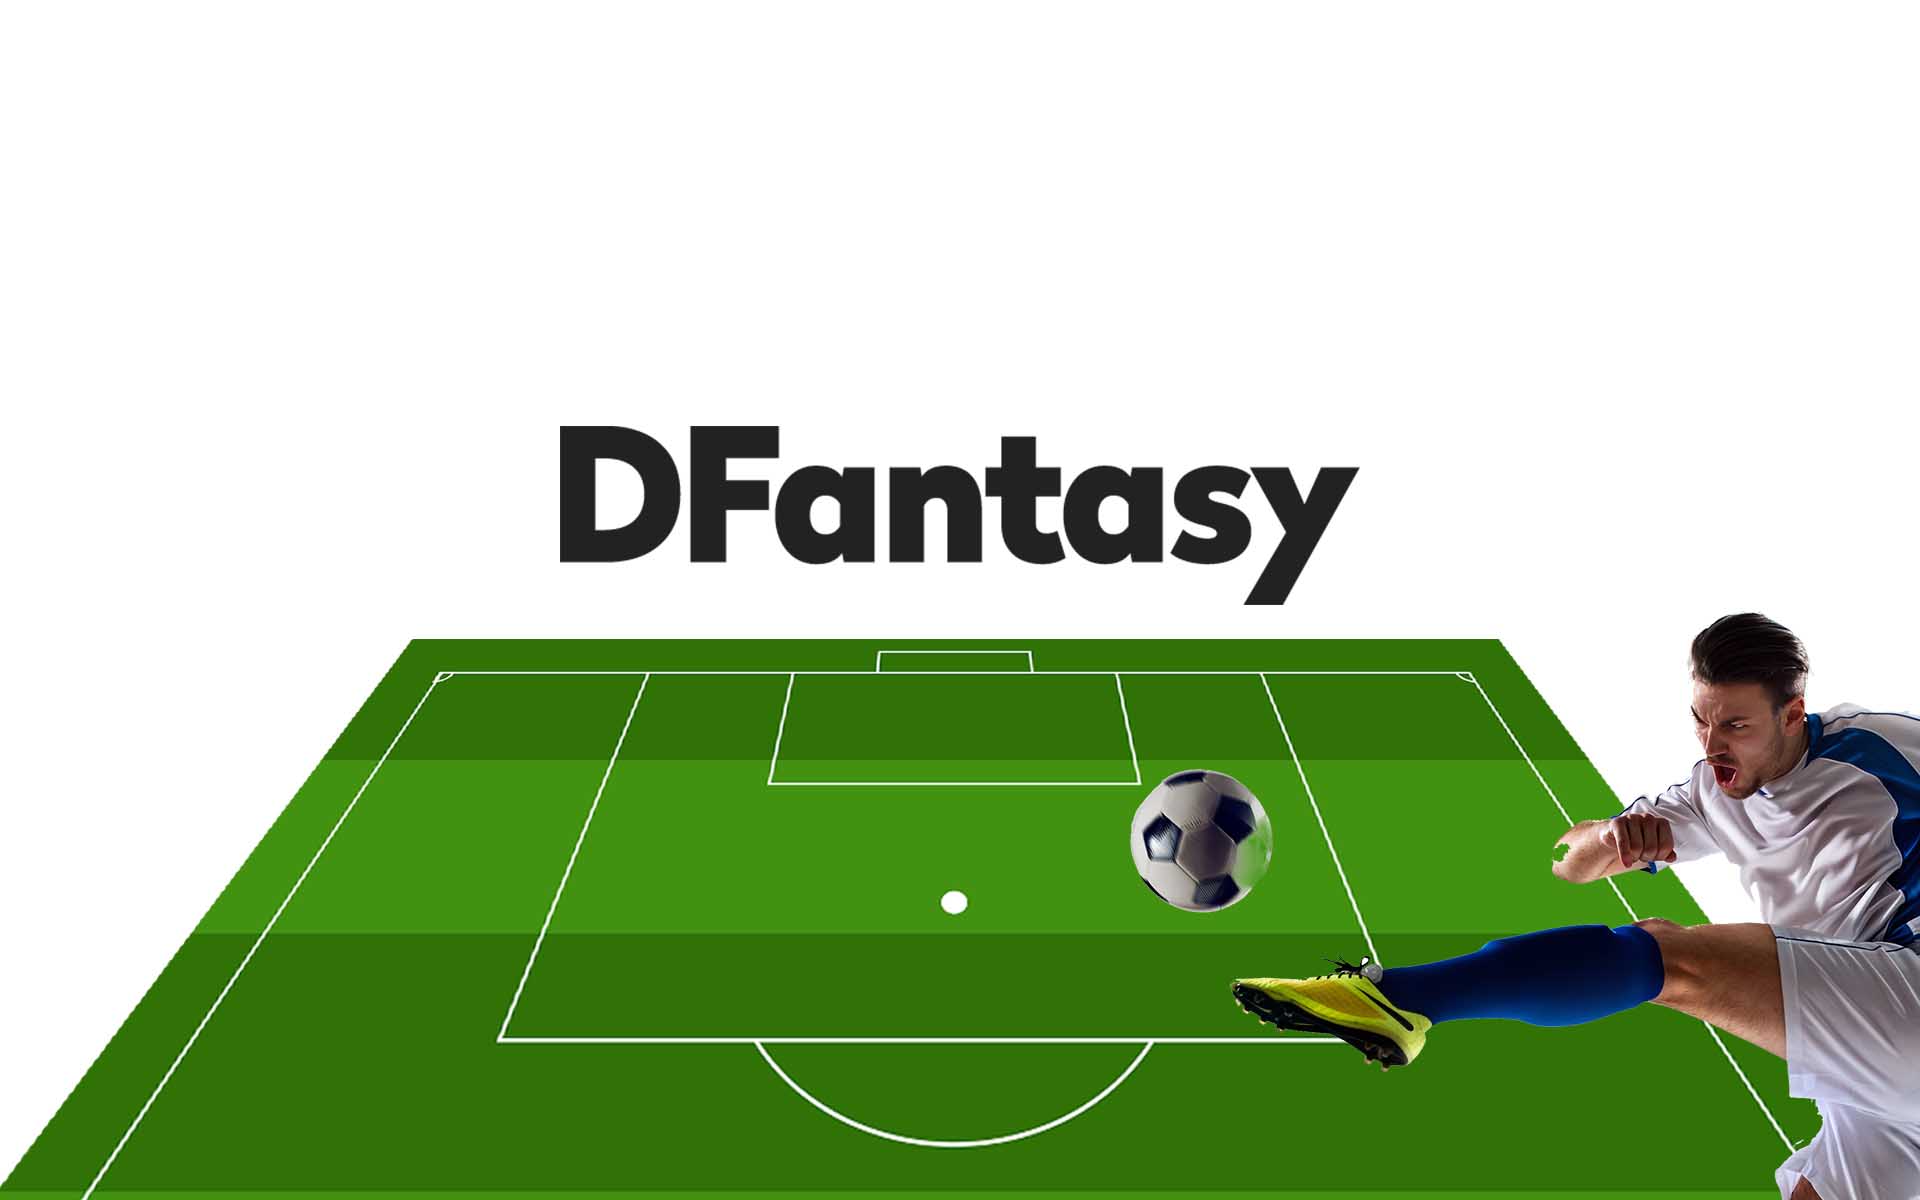 DFantasy Launches Highly Anticipated ICO Backed By World’s First Democratized Global Fantasy Sports Betting Platform Based On Blockchain Technology – Making Online Betting Fair & More Profitable